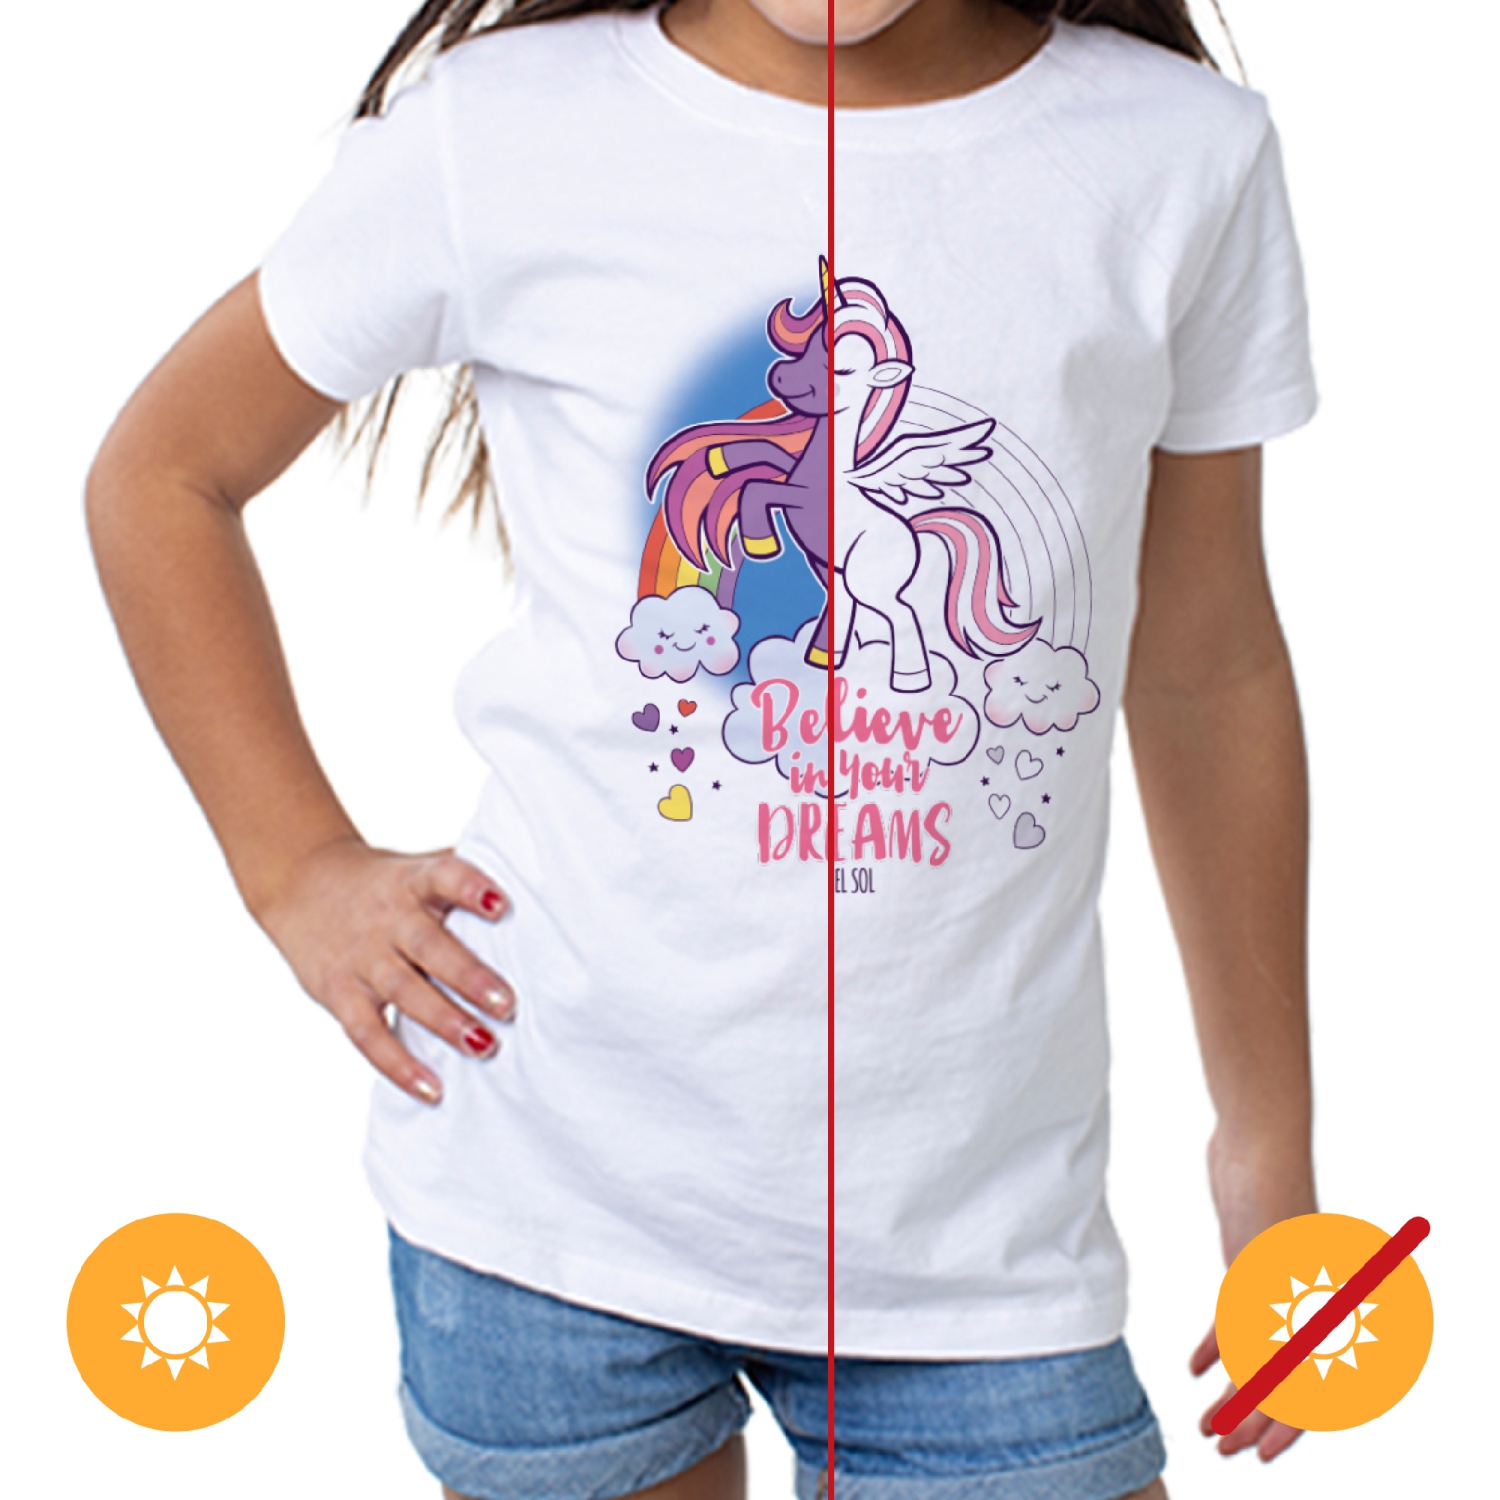 Kids Crew Tee - Believe - White by DelSol for Kids - 1 Pc T-Shirt (3T)